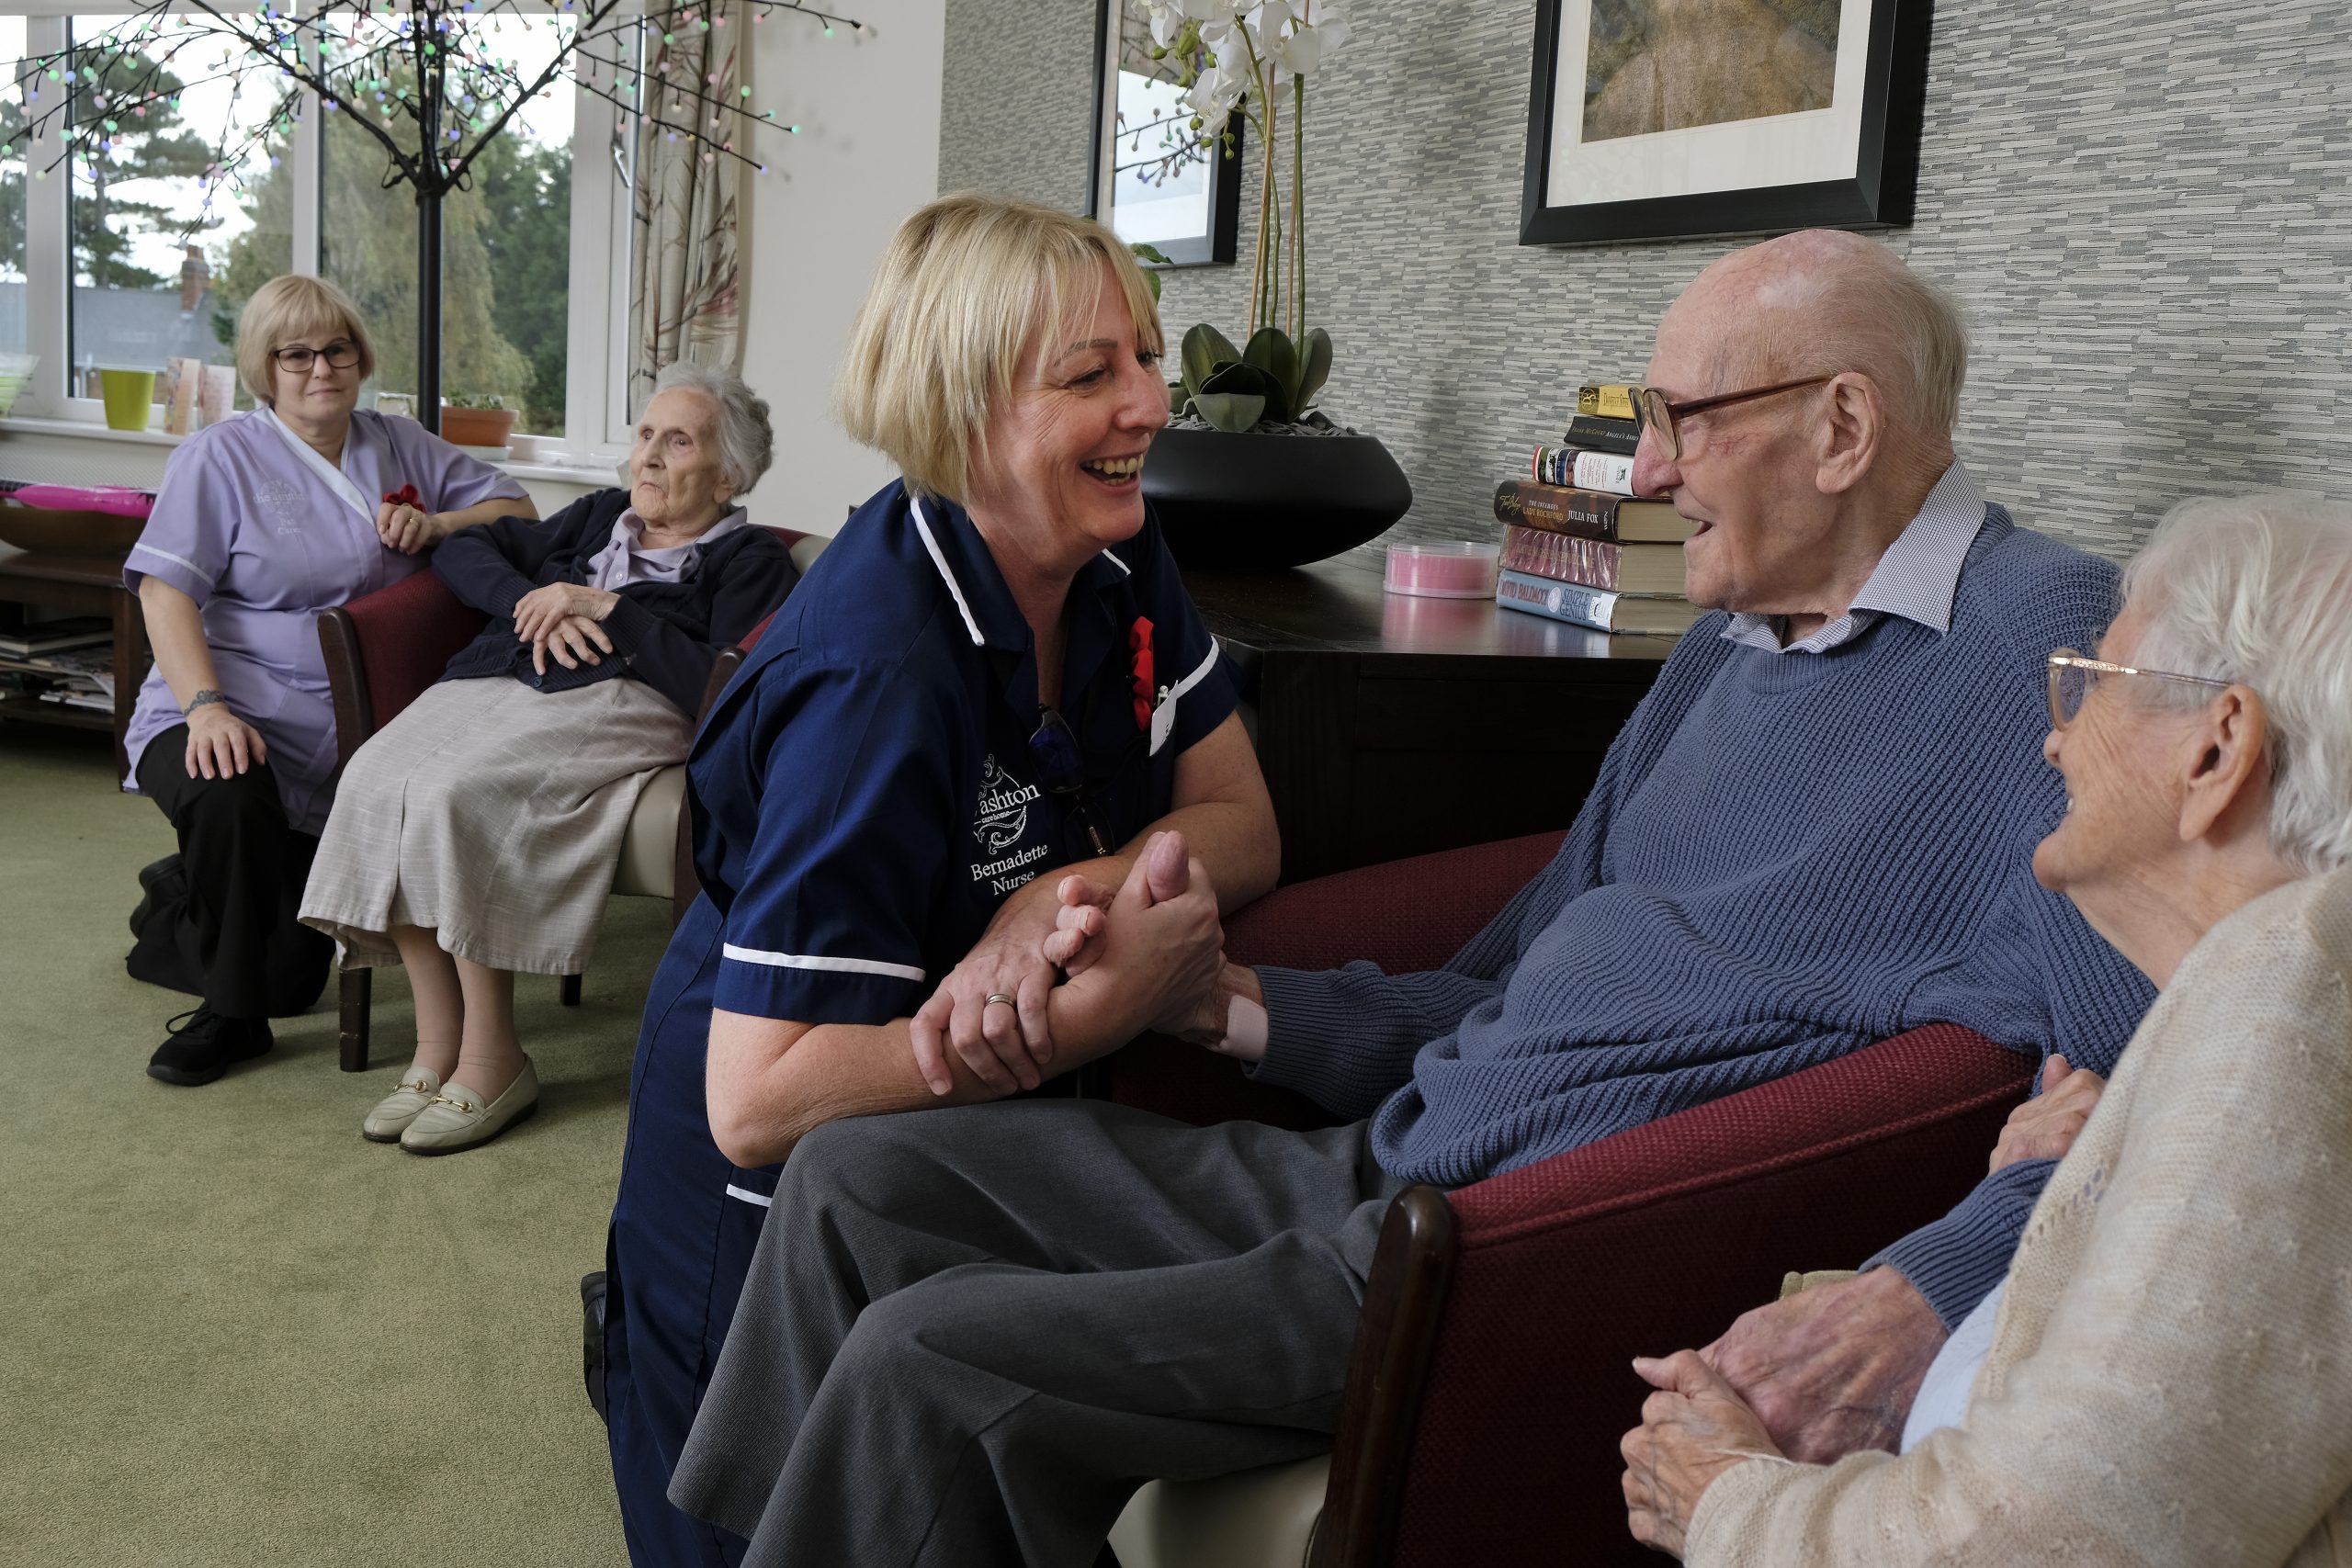 A nurse smiling with our residents who are holding hands. In the background, a carer talking to a female resident.